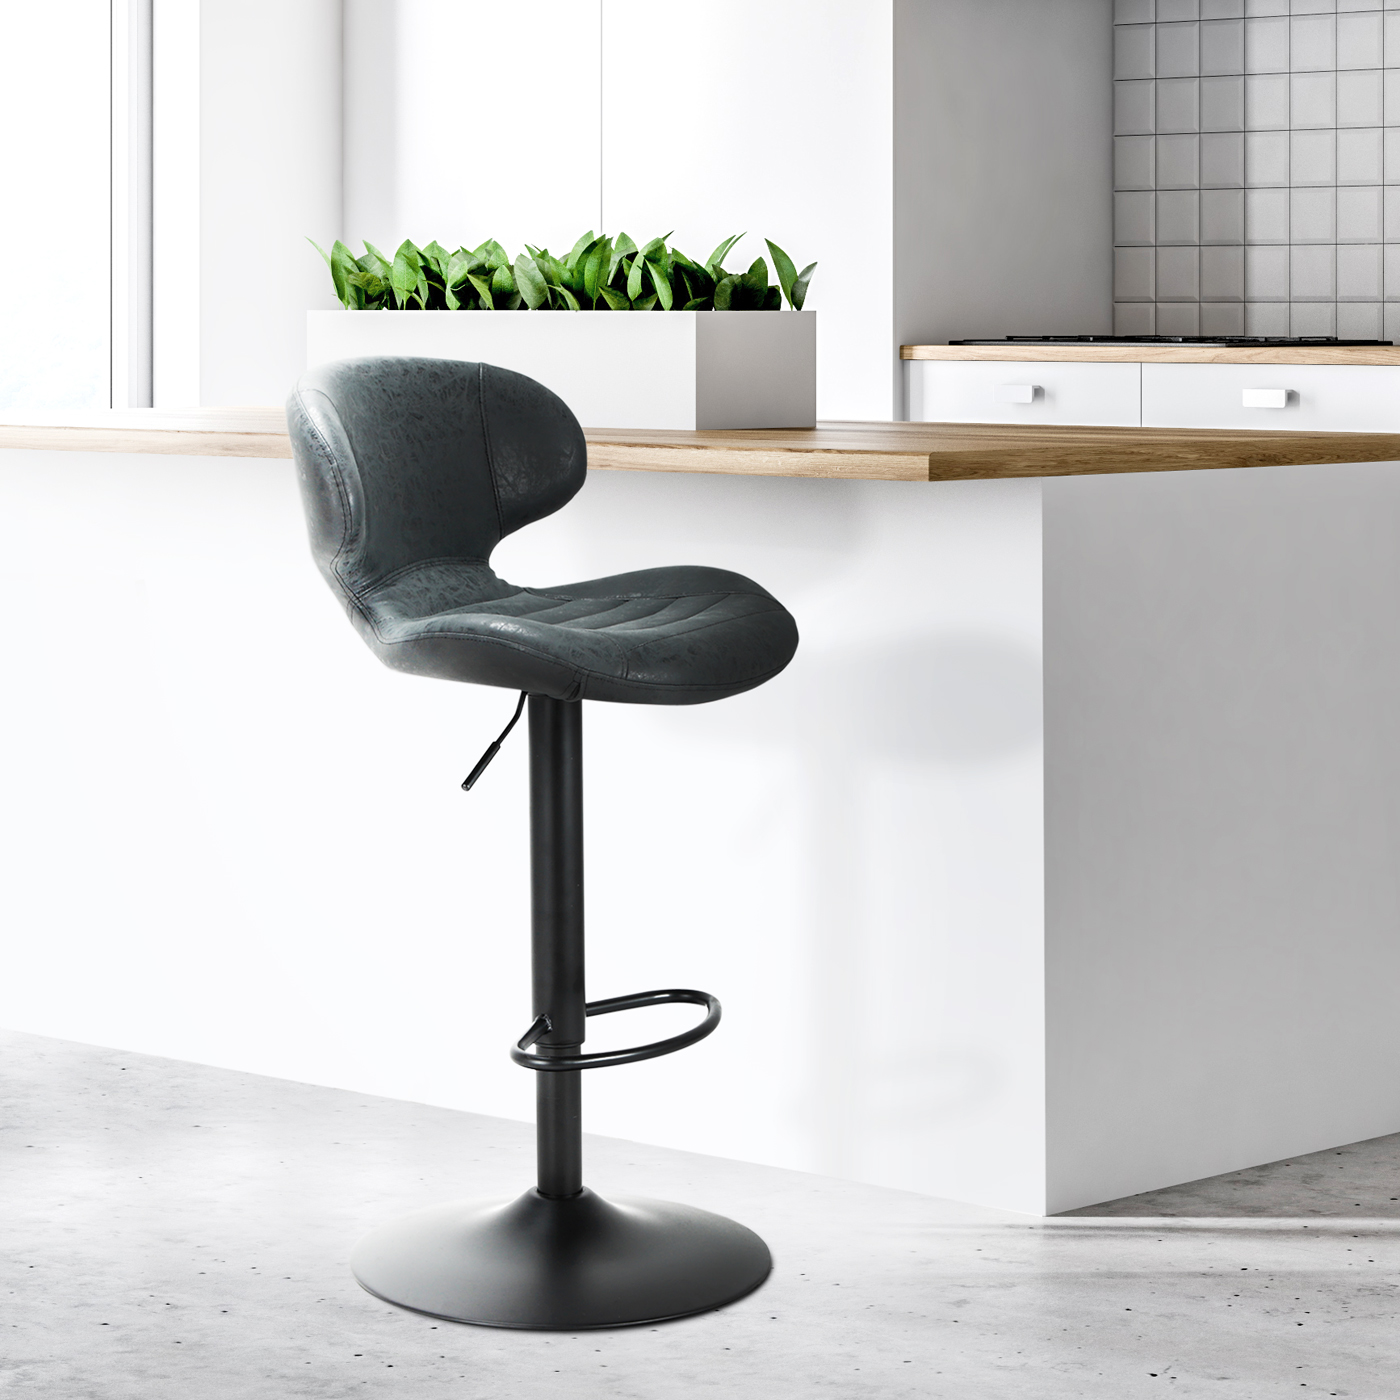 Nico faux leather bar stool in charcoal grey with adjustable height and 360 degree swivel